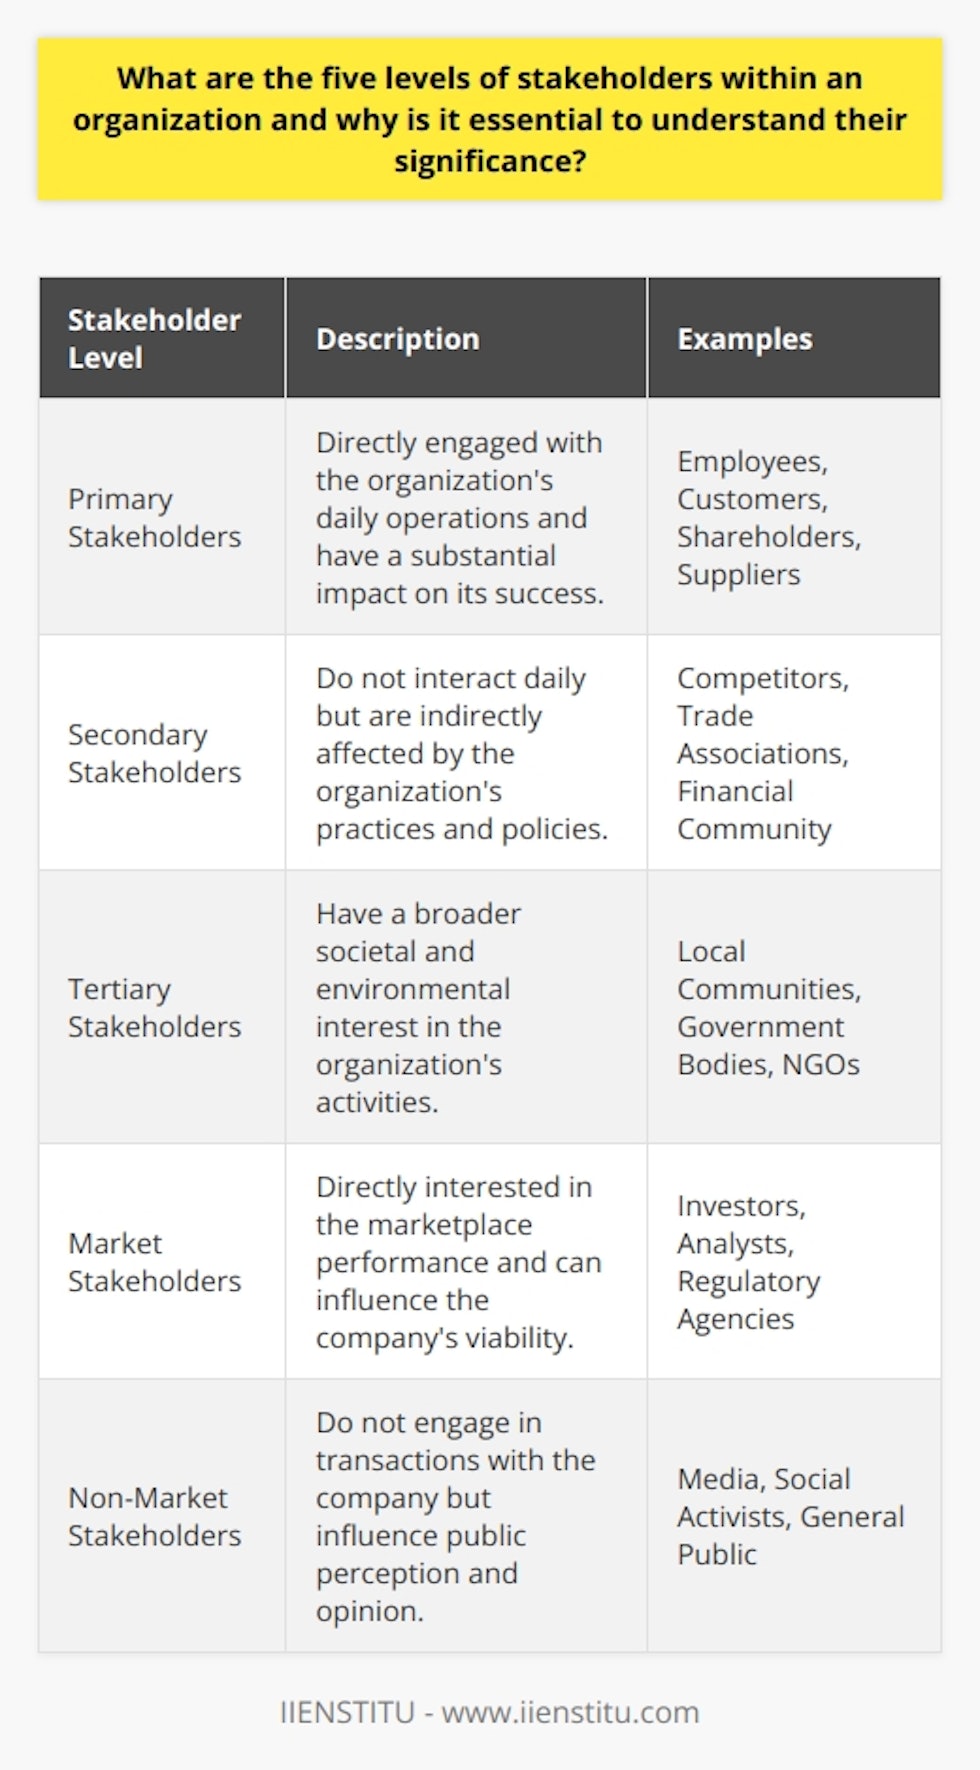 Understanding the five levels of stakeholders within an organization is pivotal for strategic management and concerted decision-making. This multi-tier categorization provides a structural approach to stakeholder analysis, enabling organizations to prioritize engagement and tailor communication strategies according to stakeholder influence and interest.Primary StakeholdersPrimary stakeholders are integral to an organization's operation and success. They are those who have a direct stake in the company and are affected by its day-to-day functioning. This includes employees who are critical to operational success, customers whose satisfaction is tantamount to revenue generation, shareholders who have a financial stake, and suppliers who depend on the business relationship. Attending to the concerns and needs of primary stakeholders is essential for maintaining a sustainable business model and ensuring long-term profitability.Secondary StakeholdersSecondary stakeholders are those who might not interact with the organization on a daily basis but are affected by its practices and policies indirectly. This group may include competitors who share market space, trade associations that advocate for industry standards, and the financial community that tracks the organization's performance. Interaction with secondary stakeholders often impels innovation, ensures adherence to industry standards, and presents an avenue for strategic alliances.Tertiary StakeholdersTertiary stakeholders are those who have an interest in the organization's impact within broader societal and environmental contexts. They tend to include local communities that may be affected by the organization's operations, government bodies regulating compliance with laws, and non-governmental organizations (NGOs) that scrutinize the company’s social and environmental accountability. Nurturing relationships with tertiary stakeholders is not only essential to maintain a license to operate but also contributes to corporate social responsibility and community well-being.Market StakeholdersMarket stakeholders possess a definite interest in the company's market performance and can significantly influence its marketplace viability. This group is wide-ranging and includes parties such as investors, analysts, customers, suppliers, and even regulatory agencies. Understanding market stakeholders’ interests enables companies to align their marketing strategies, supply chain management, product development, and regulatory compliance efforts in line with market expectations and dynamics.Non-Market StakeholdersNon-market stakeholders are those who do not partake in the economic transactions of the company yet are influential in shaping public perception and opinion. Media outlets, social activists, and the general public fall into this category. These stakeholders can amplify or damage a company's reputation based on its decisions and actions. Therefore, it is imperative to engage with non-market stakeholders through community relations, corporate communications, and public relations campaigns, hence building goodwill and societal trust.In conclusion, recognizing the hierarchy of stakeholders is indispensable for an organization's strategic framework. It enables the prioritization of stakeholder needs and the crafting of nuanced engagement strategies. By effectively managing these relationships, an organization can foster loyalty, anticipate and mitigate risks, influence public opinion, and enhance its reputation, all of which are key to thriving in a competitive and dynamic business environment.